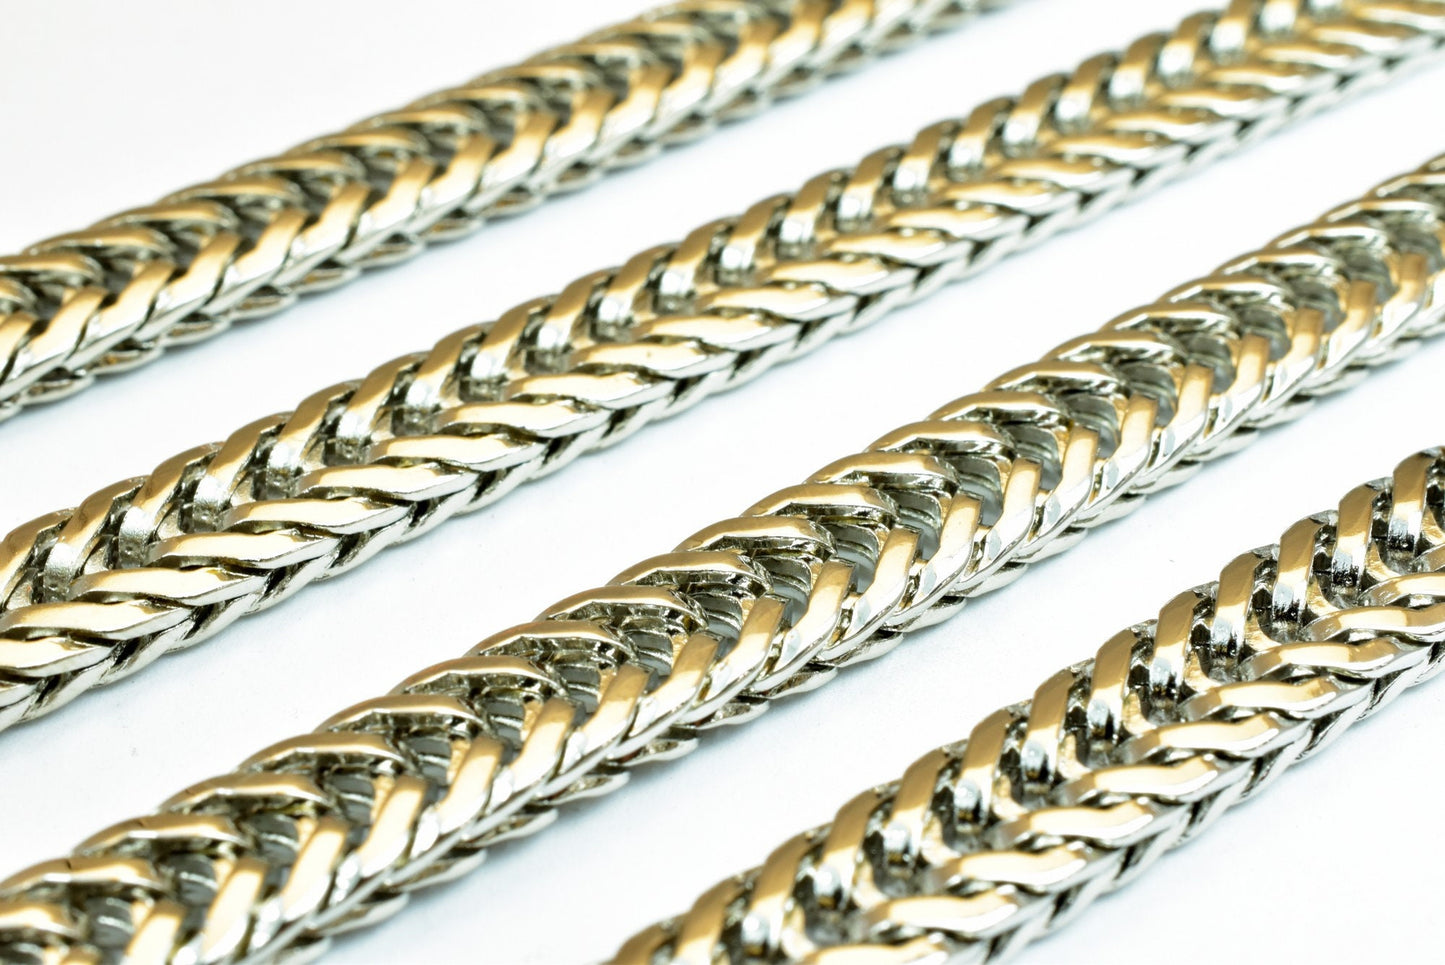 Spiga or Wheat Rhodium Filled White Gold Filled Chain 22 1/4" Inch, Size 8x3mm CS14 For Jewelry Making